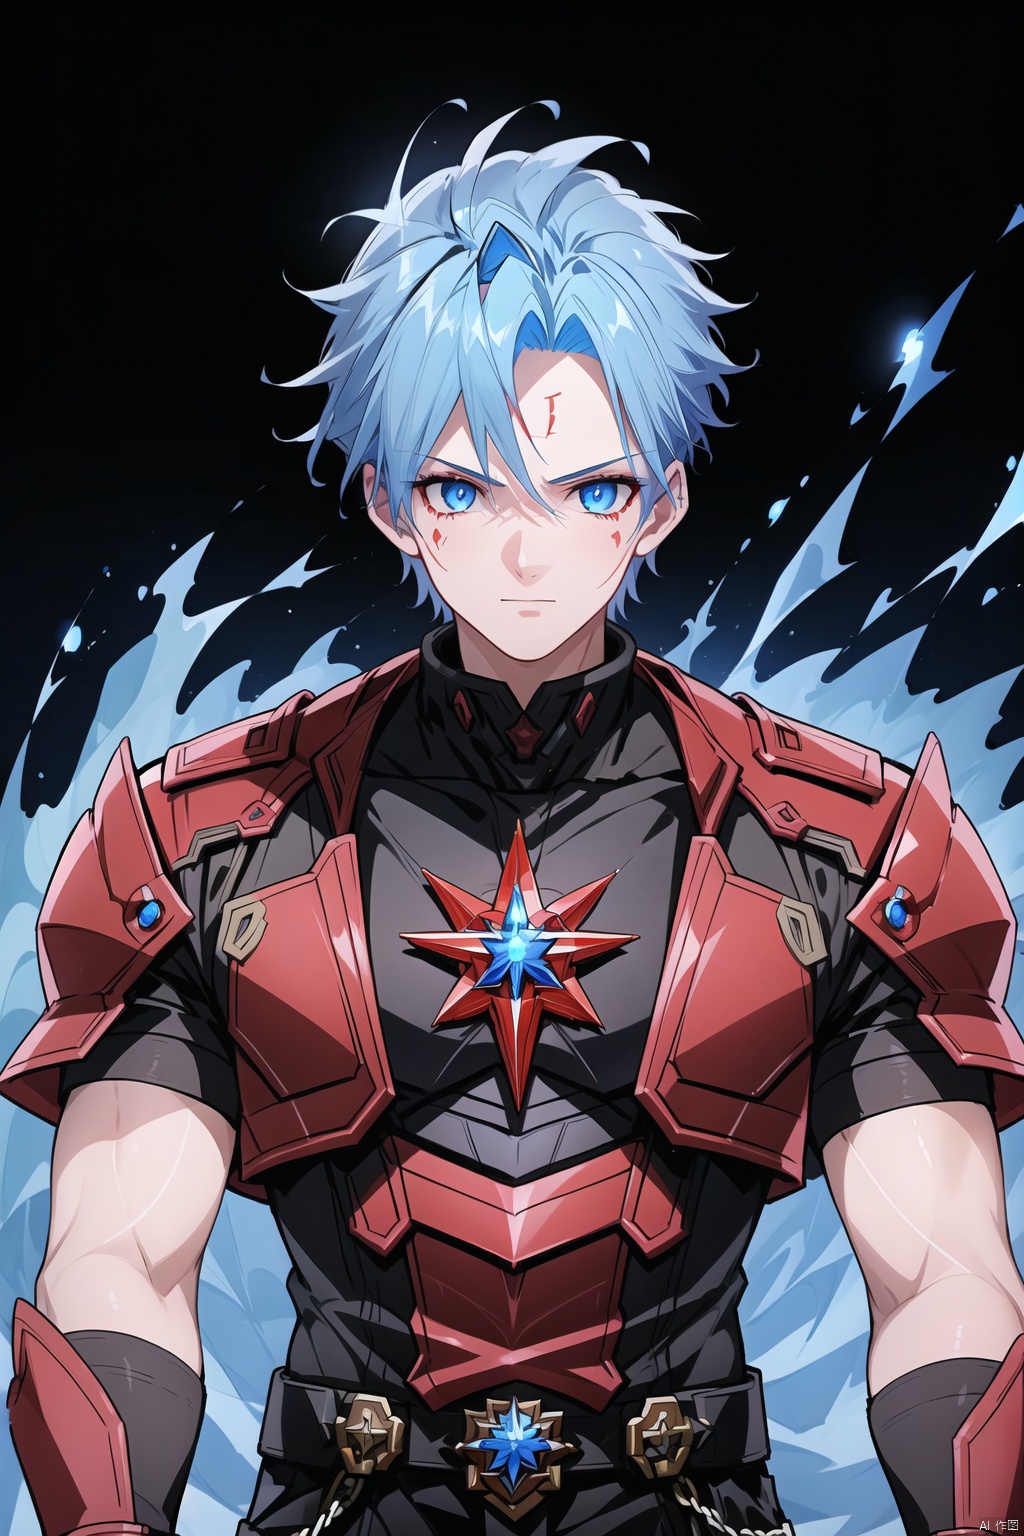  1 boy, blue eyes, There is a tattoo on the forehead, Flame hair, Burning hair, (bust: 1.3), dynamic pose, HD, 32k, (Masterpiece: 1.5), Red textured mecha, Pendulum, Hidden hands., Arso, black background,